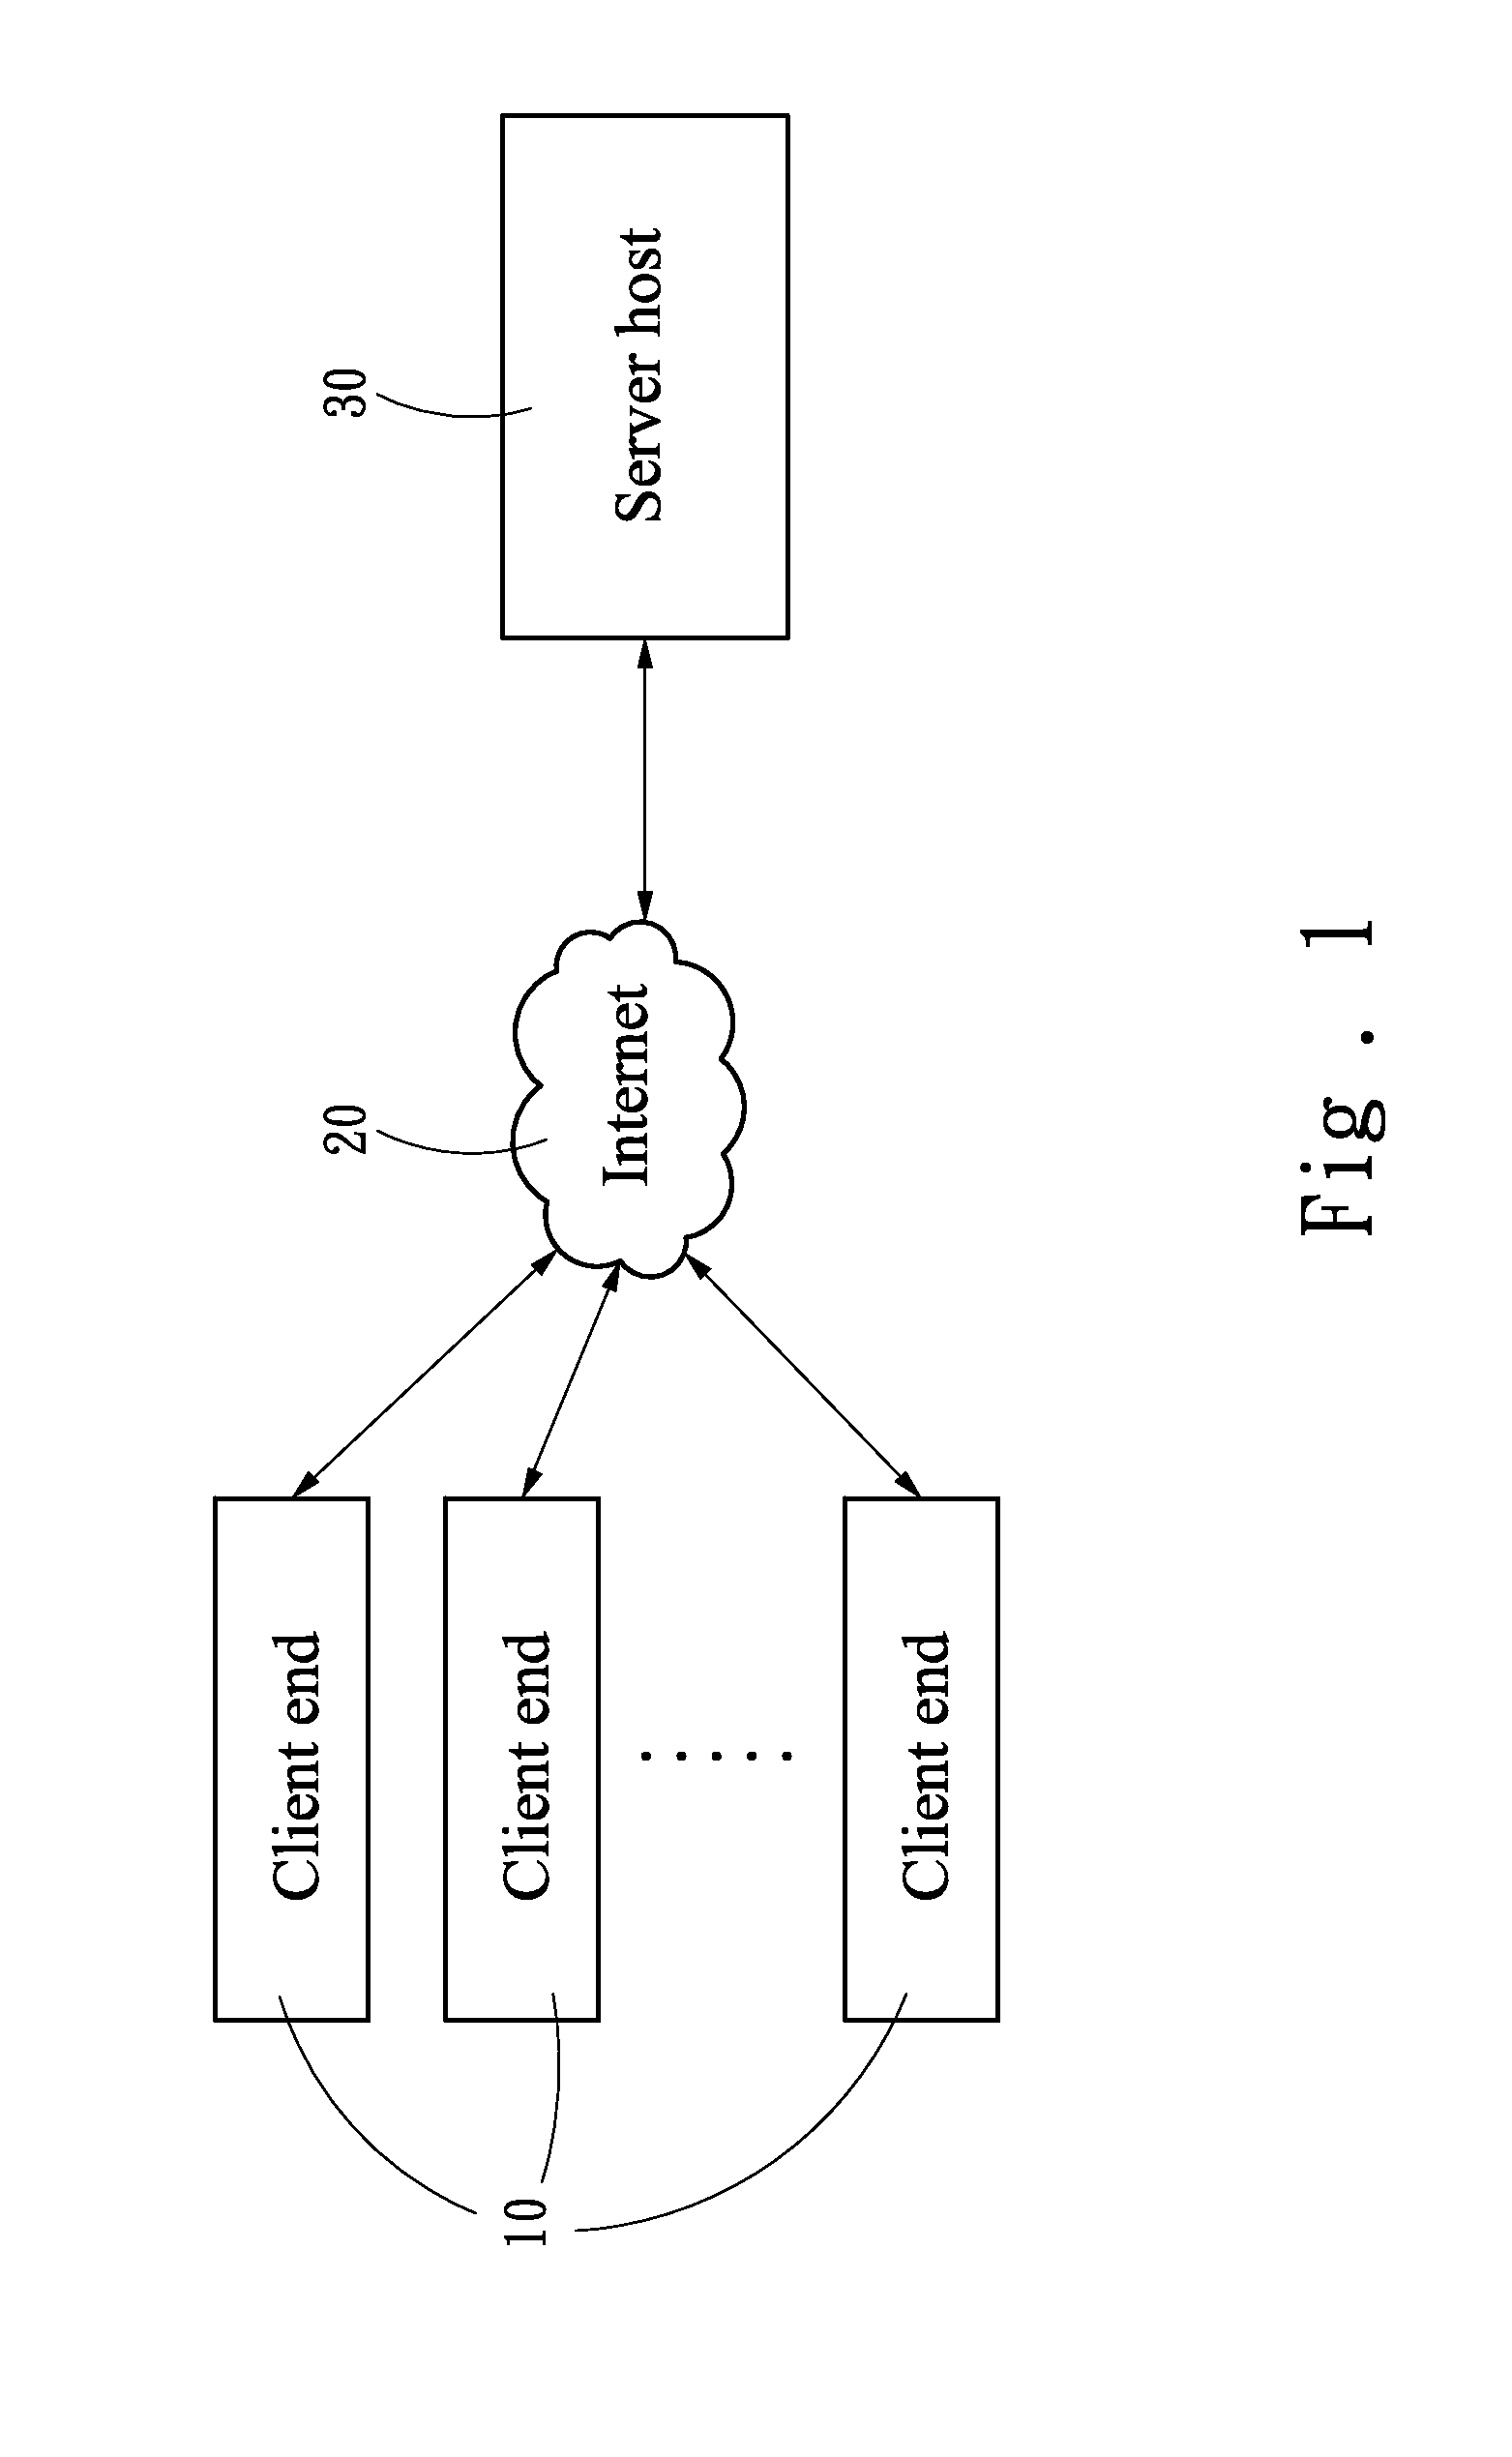 Server system connection process method preventing network congestion